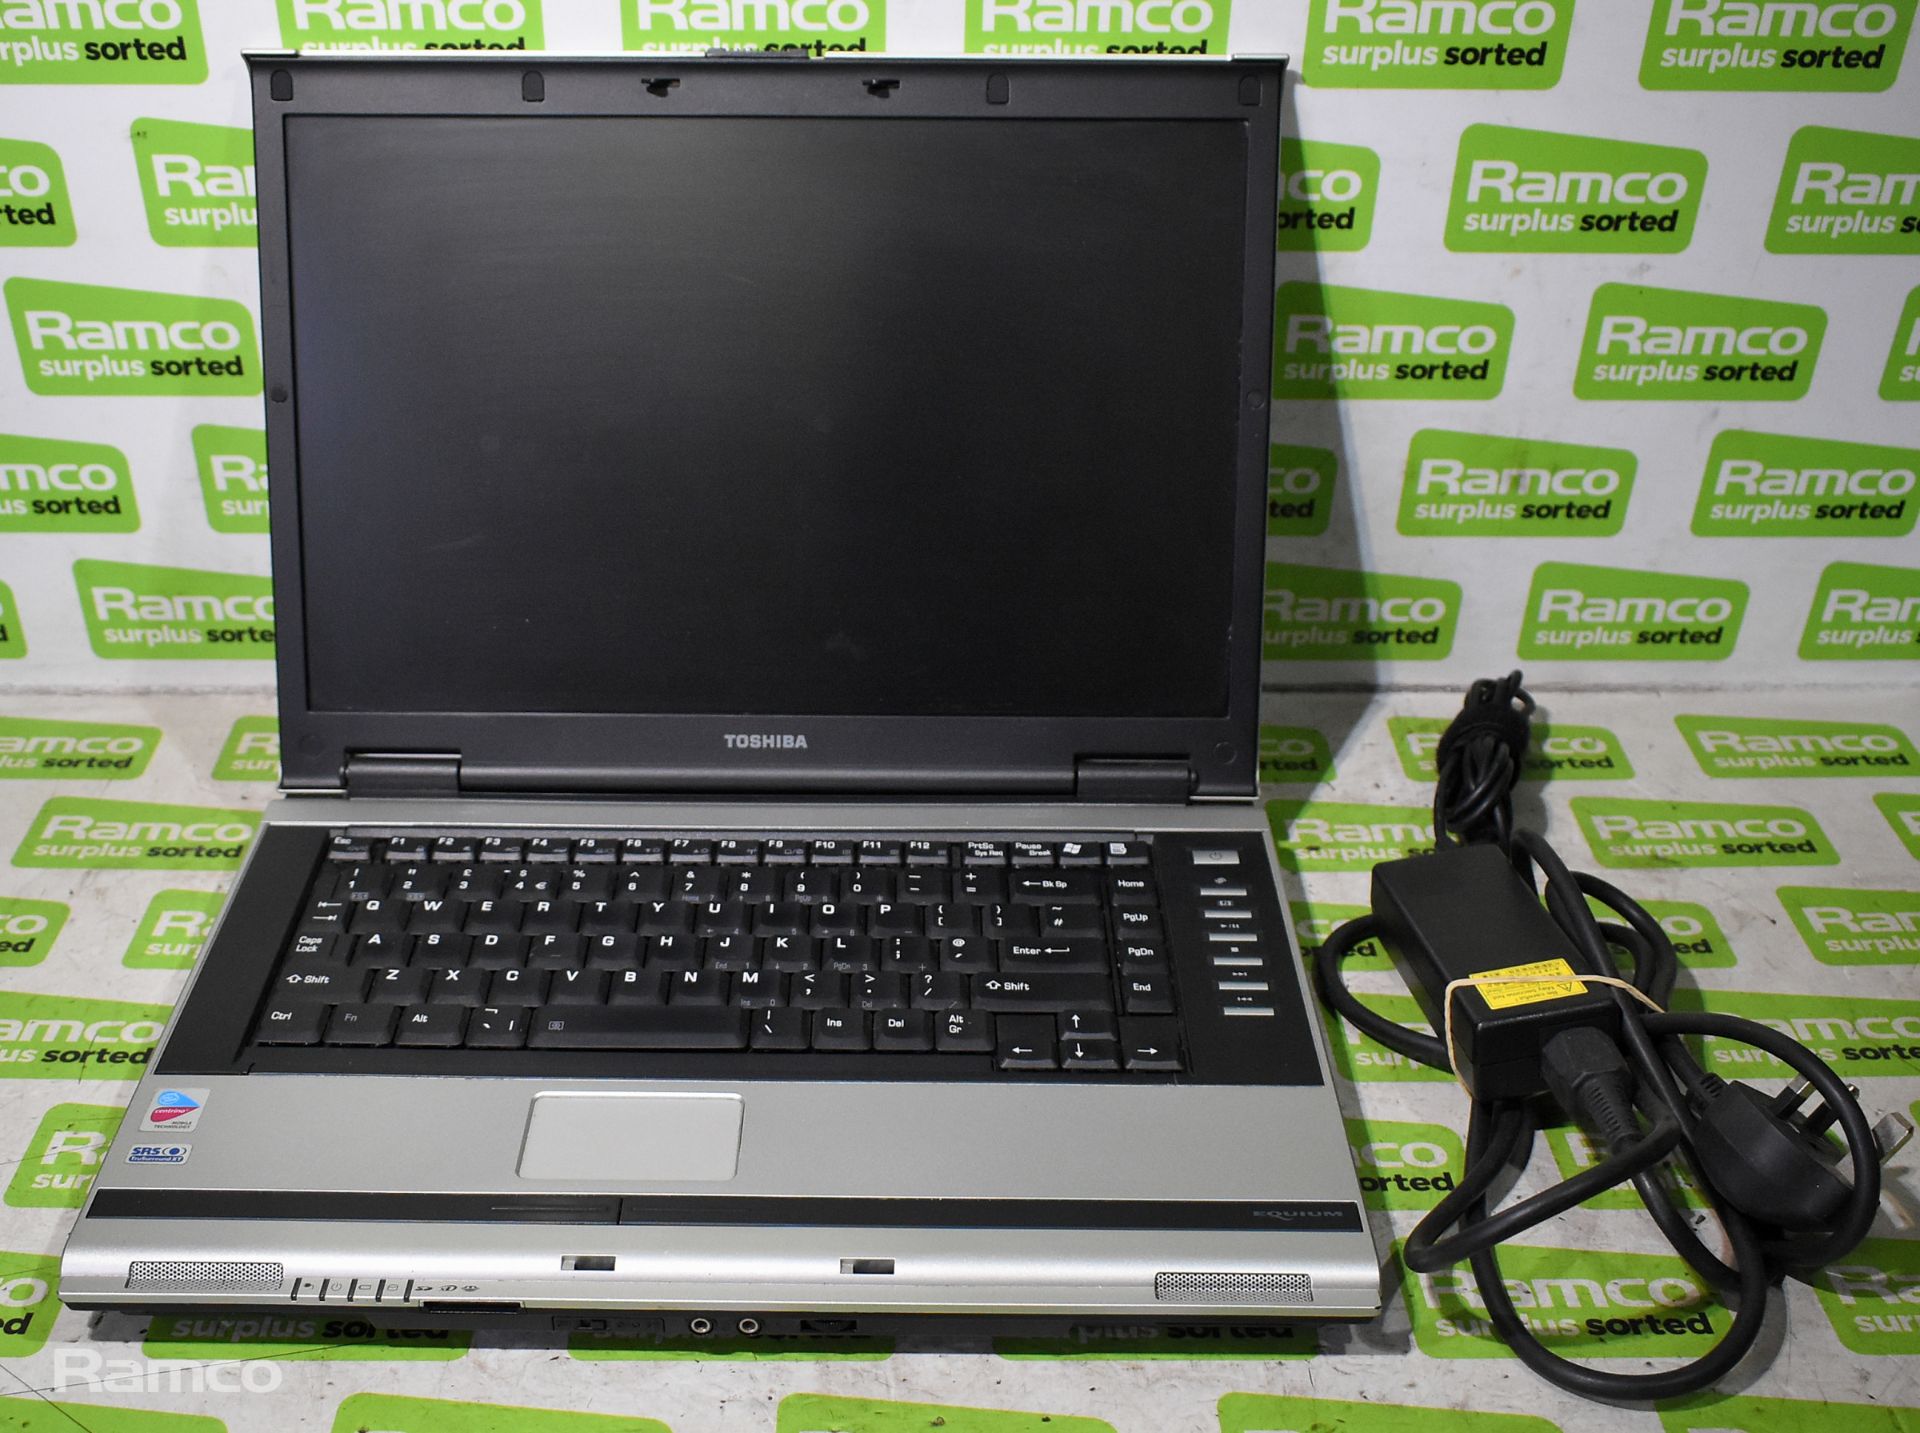 Toshiba Equium M70-337 laptop with power leads